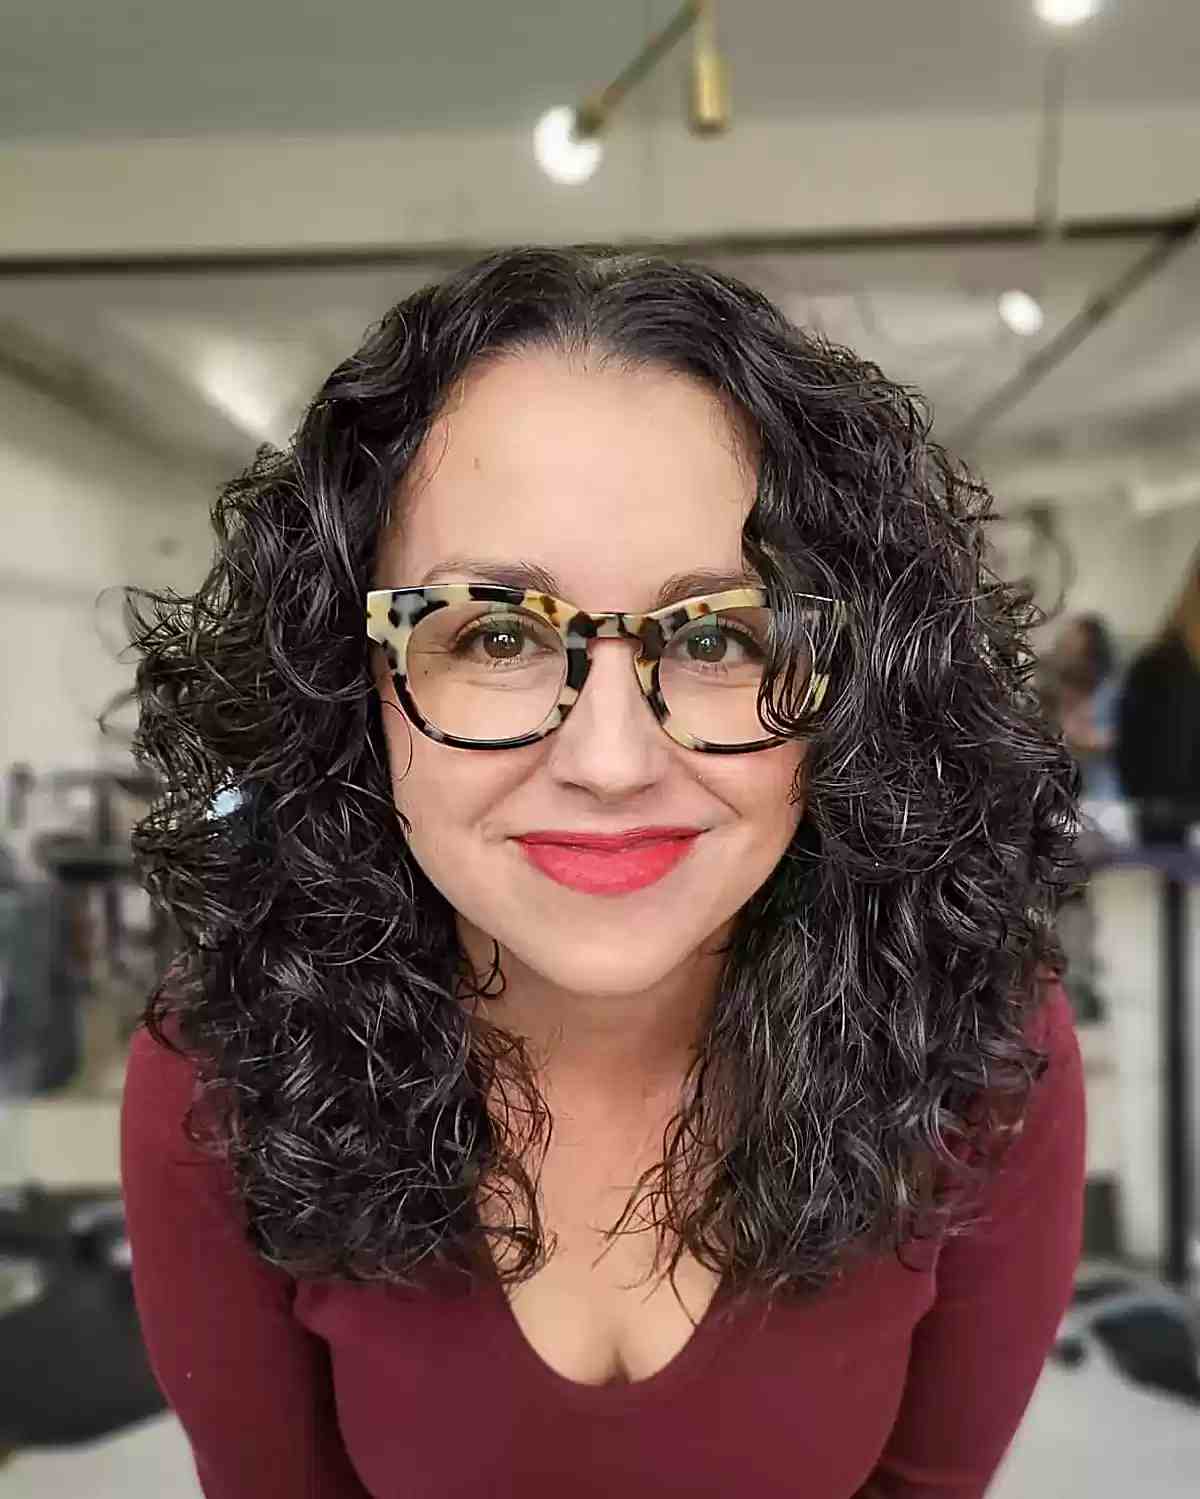 Medium-Length Type 3 Curly Shag for Older women with salt and pepper hair with glasses